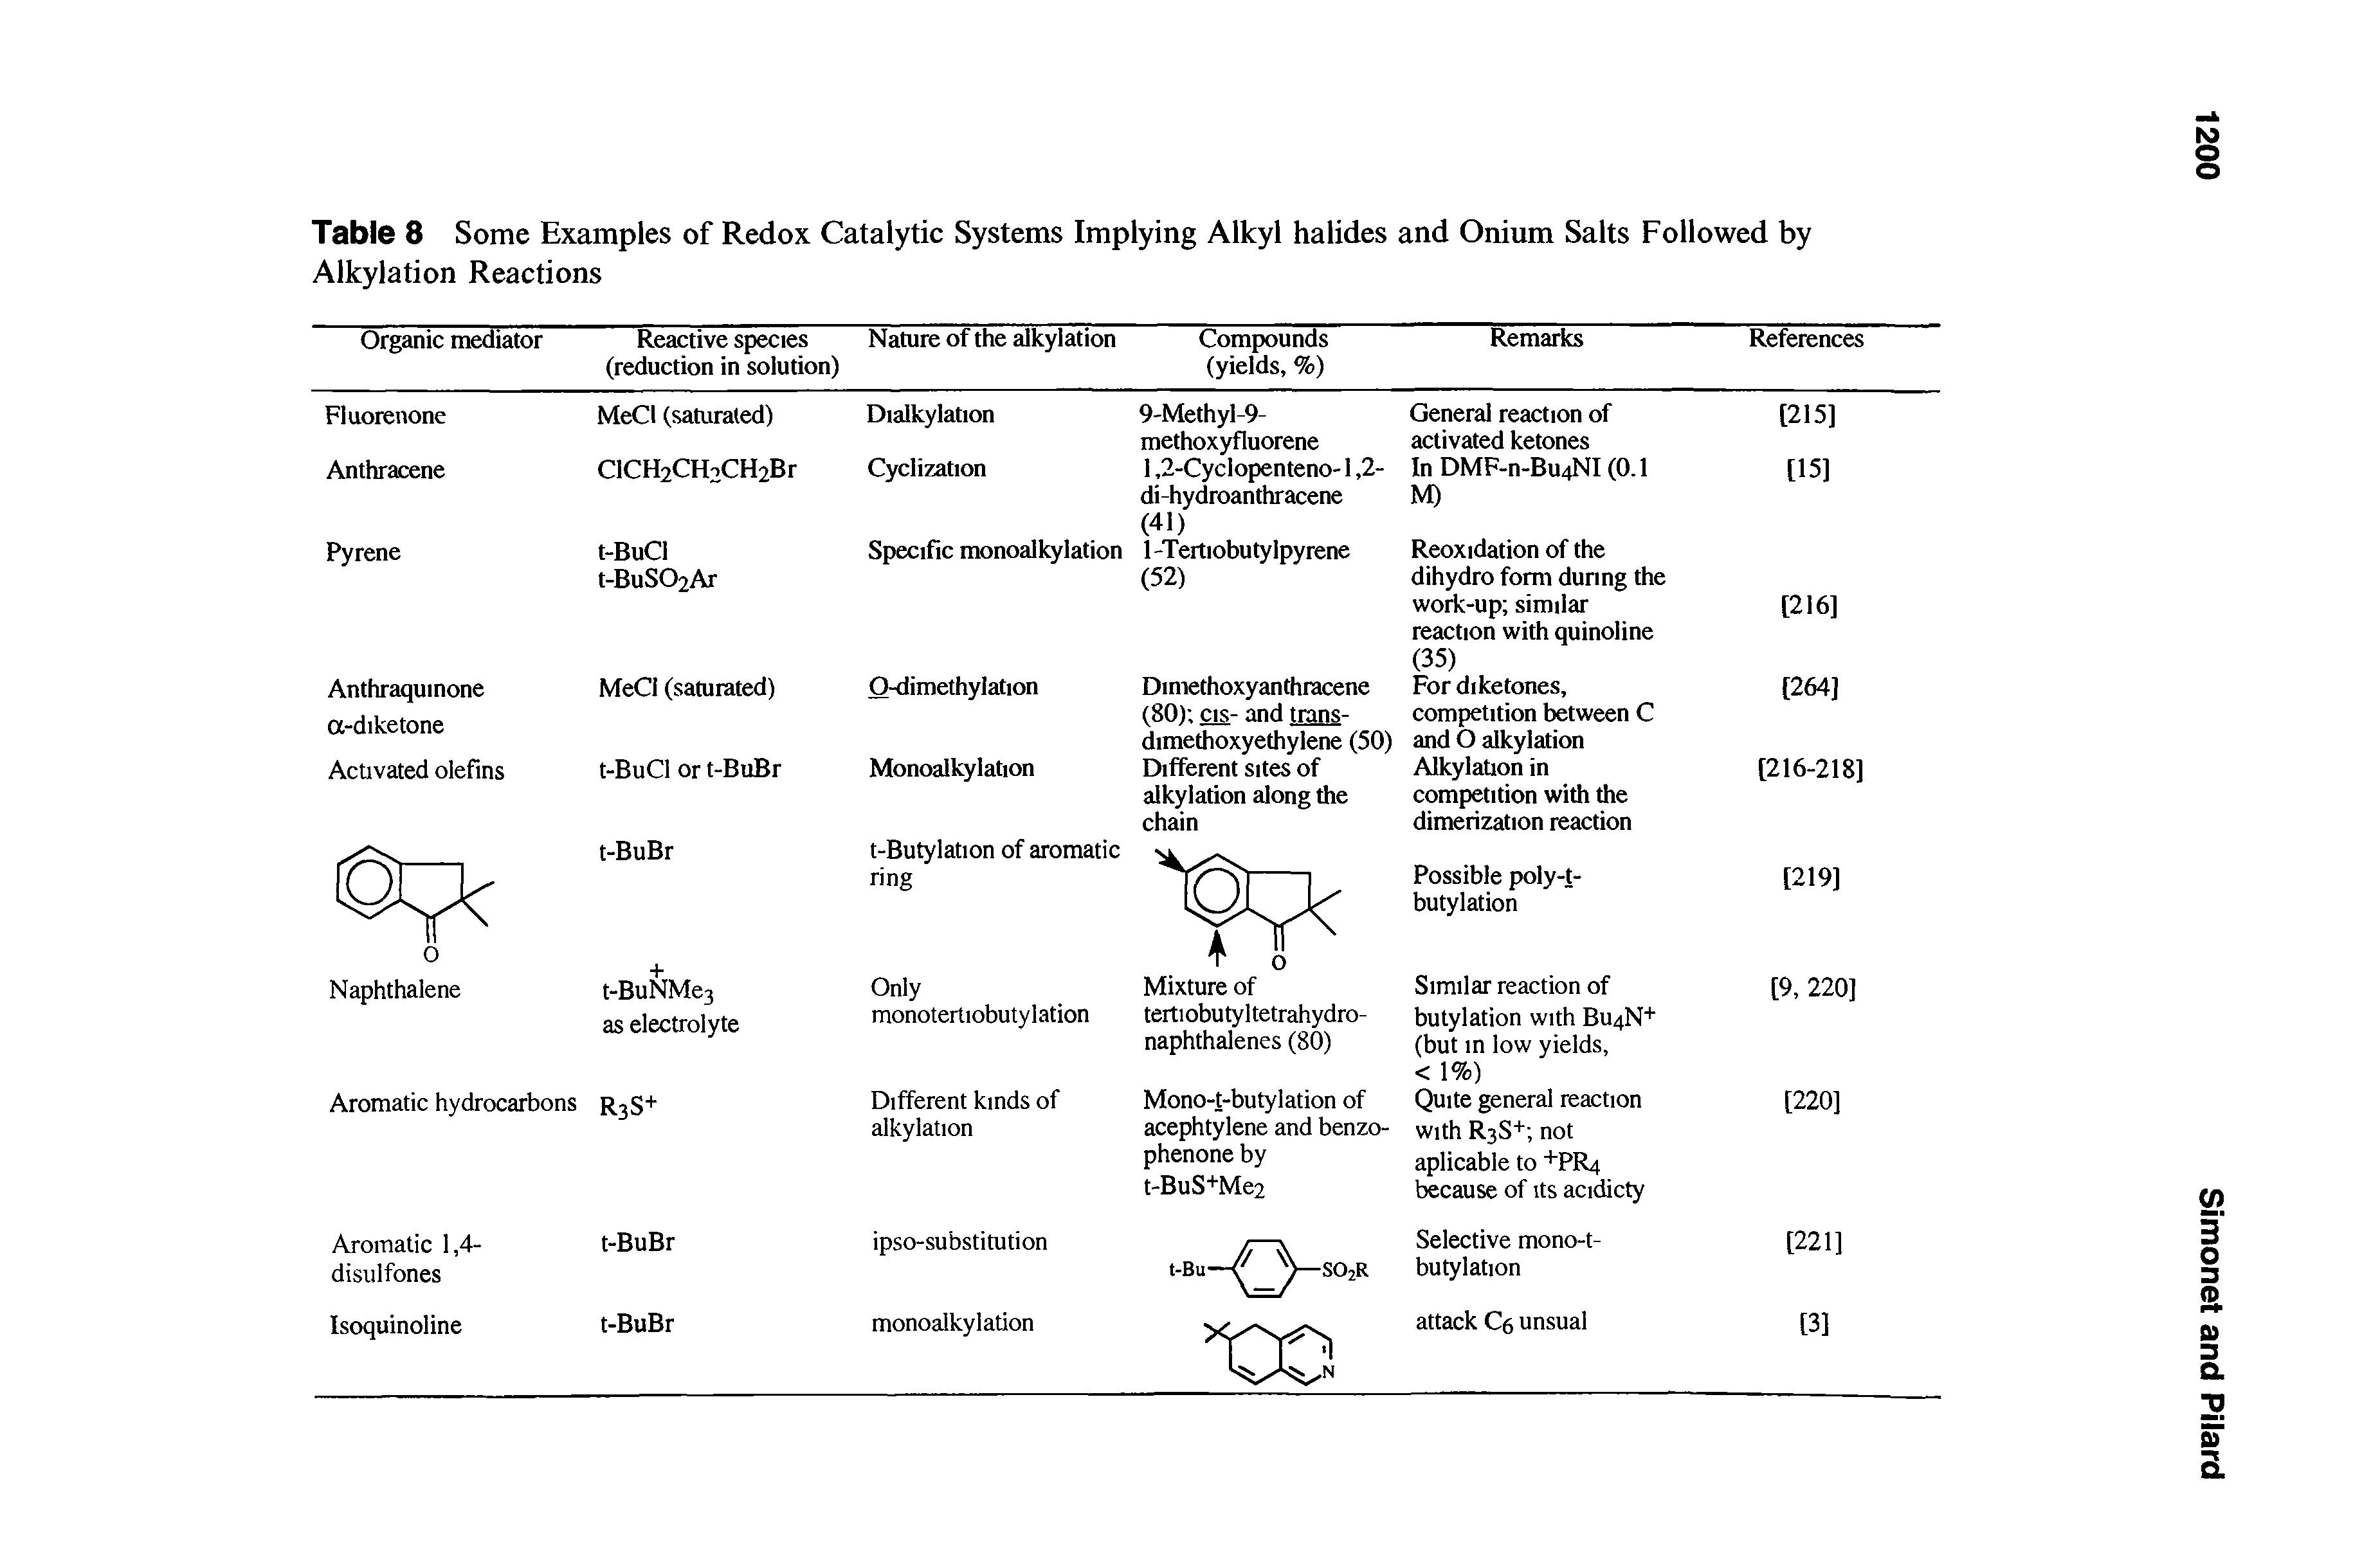 Table 8 Some Examples of Redox Catalytic Systems Implying Alkyl halides and Onium Salts Followed by Alkylation Reactions...